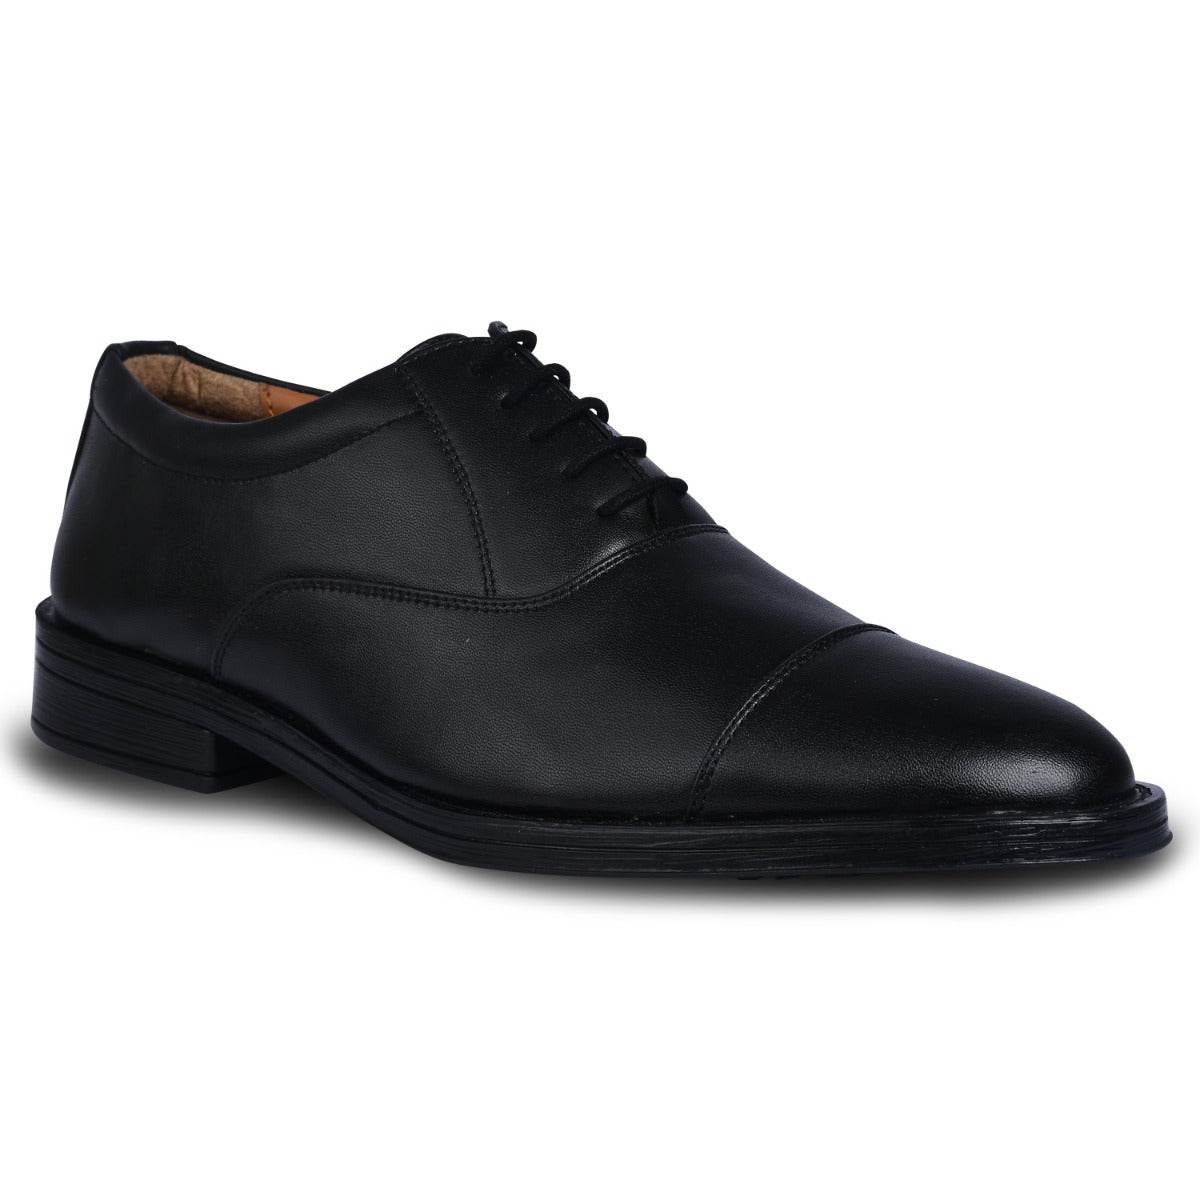 Paragon  FB95135GP Men Formal Shoes | Corporate Office Shoes | Smart &amp; Sleek Design | Comfortable Sole with Cushioning | For Daily &amp; Occasion Wear